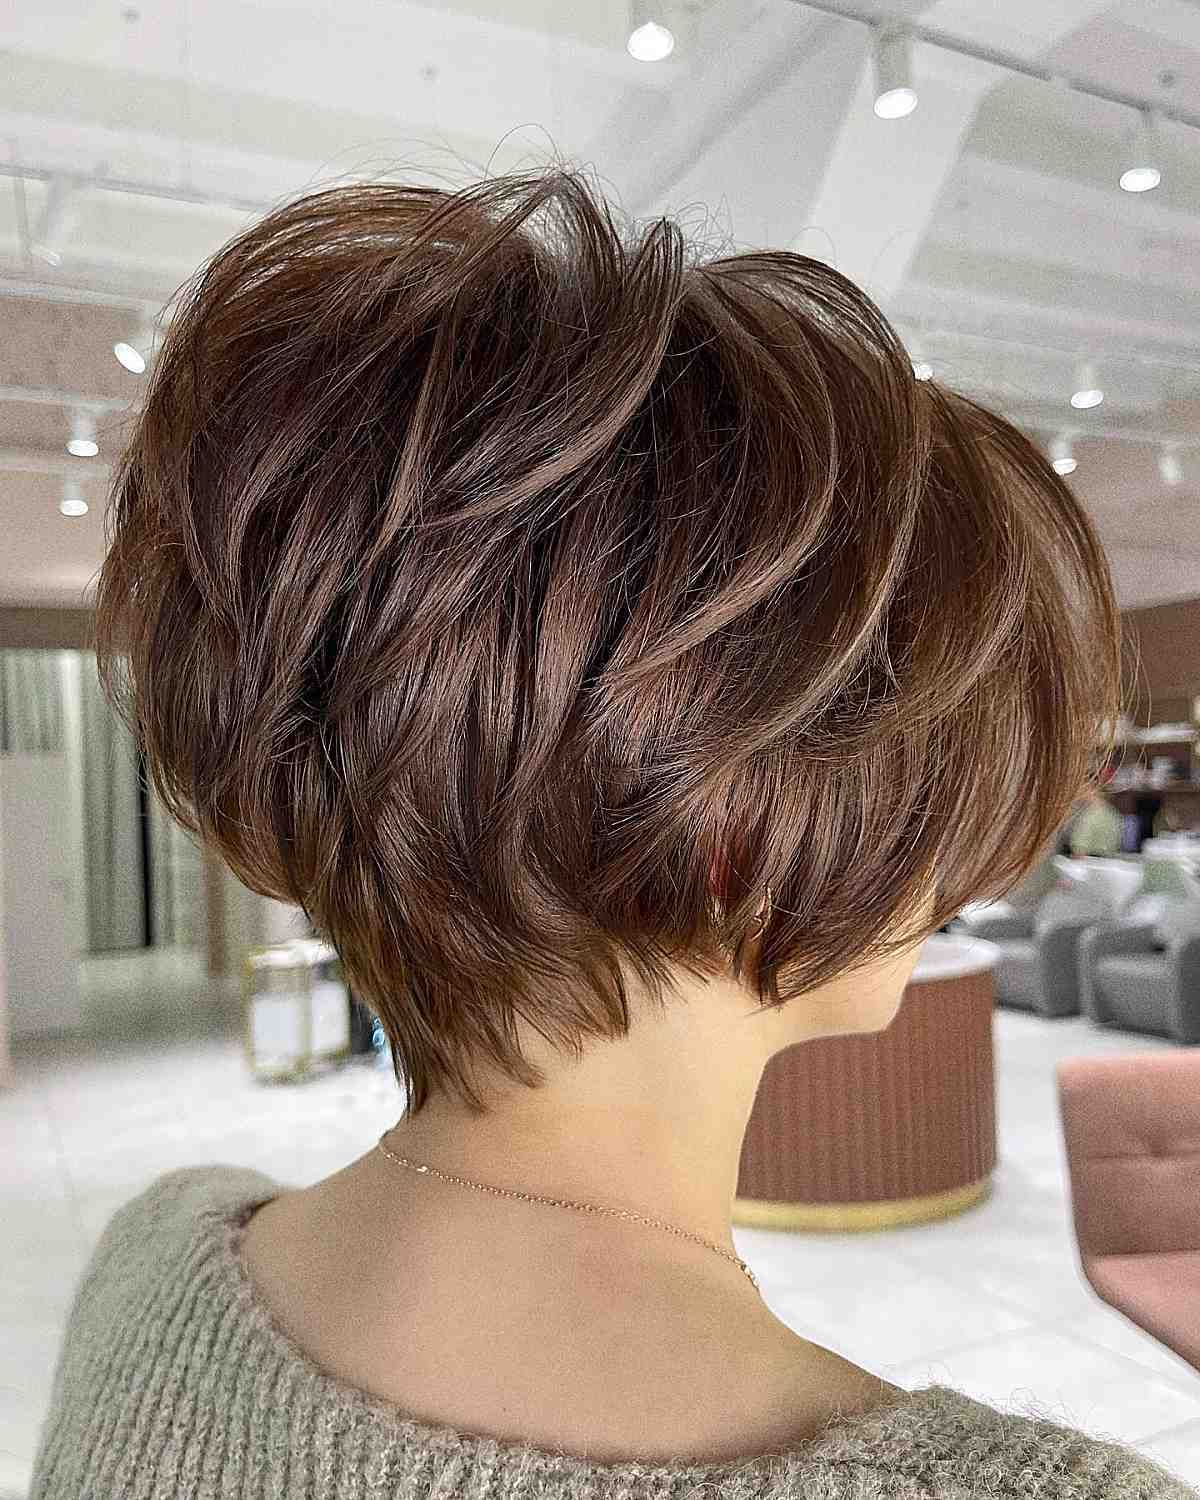 The 34 Cutest Pixie Bob Haircut Ideas Ever Throughout Layered Messy Pixie Bob Hairstyles (View 4 of 20)